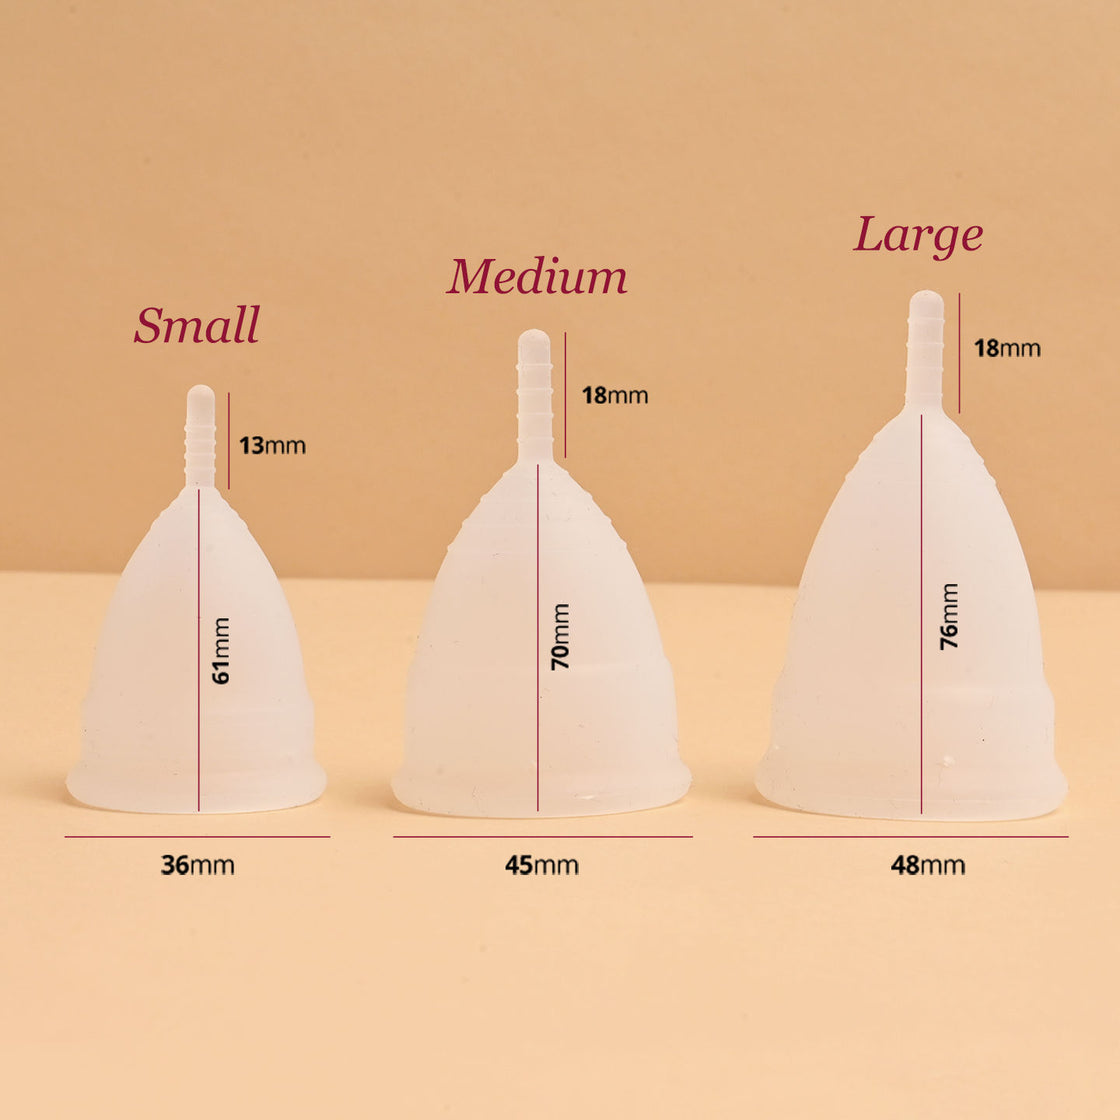 Carmesi Reusable Menstrual Cup for Women - Medium Size - With Free Pouch